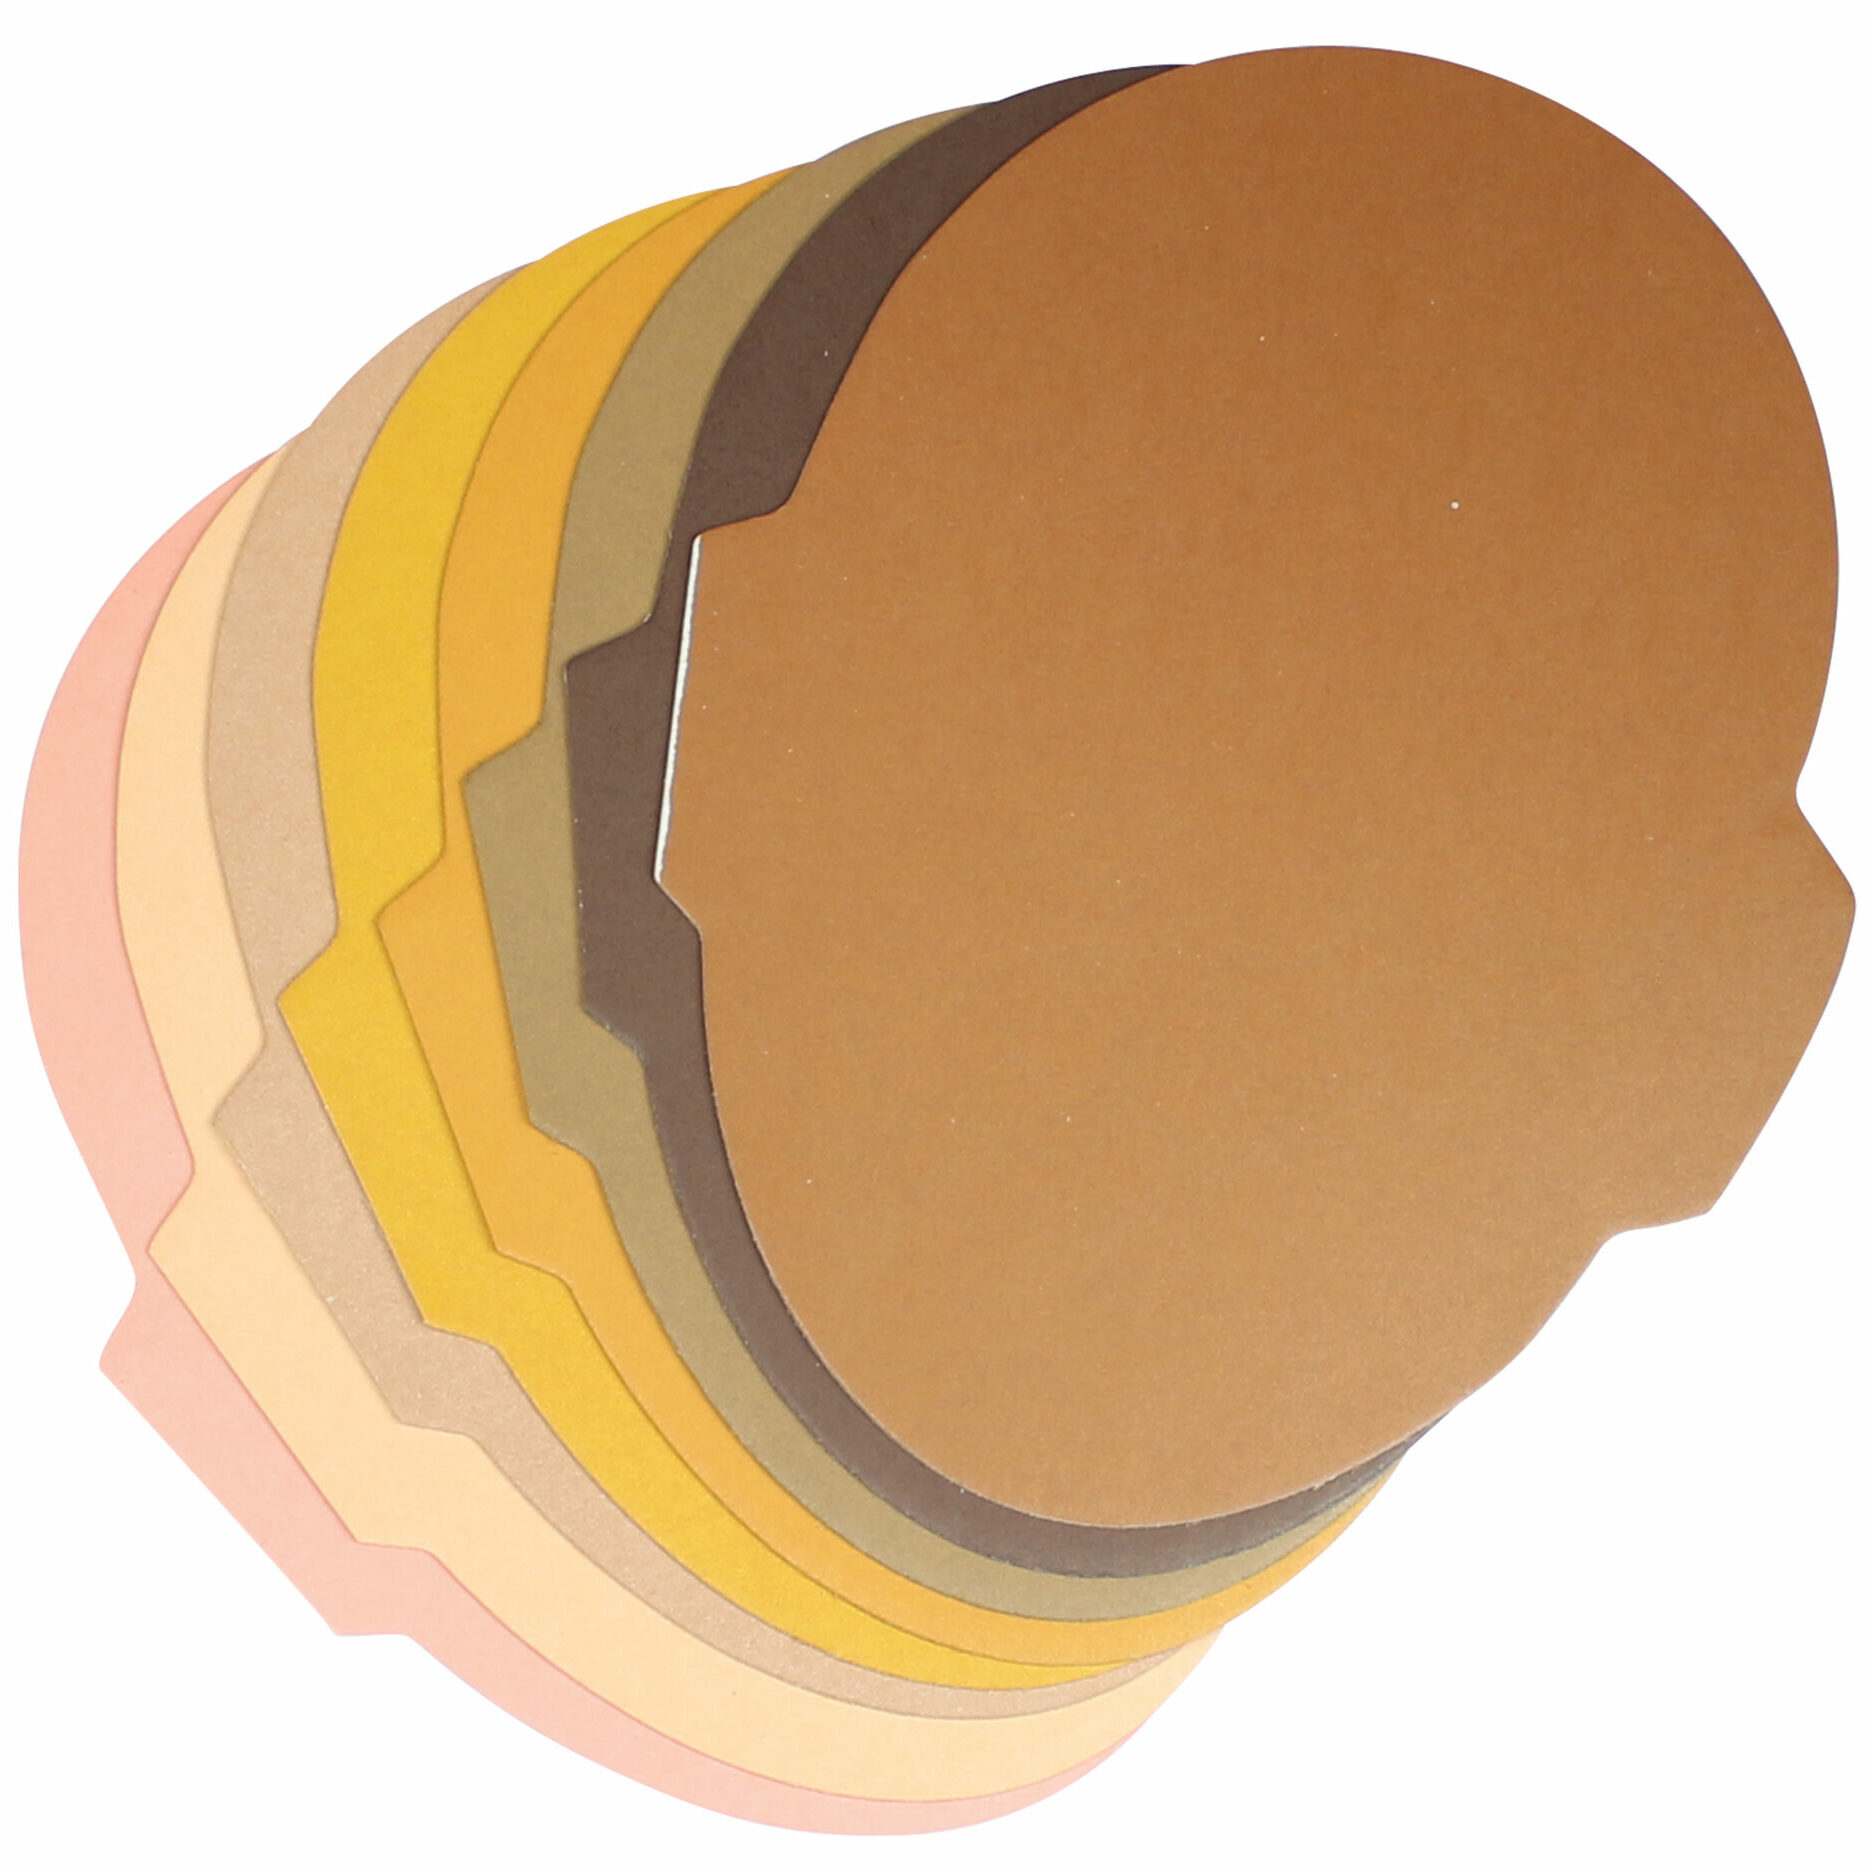 Photo of the Skin Tone Face Drawing Pad papers.